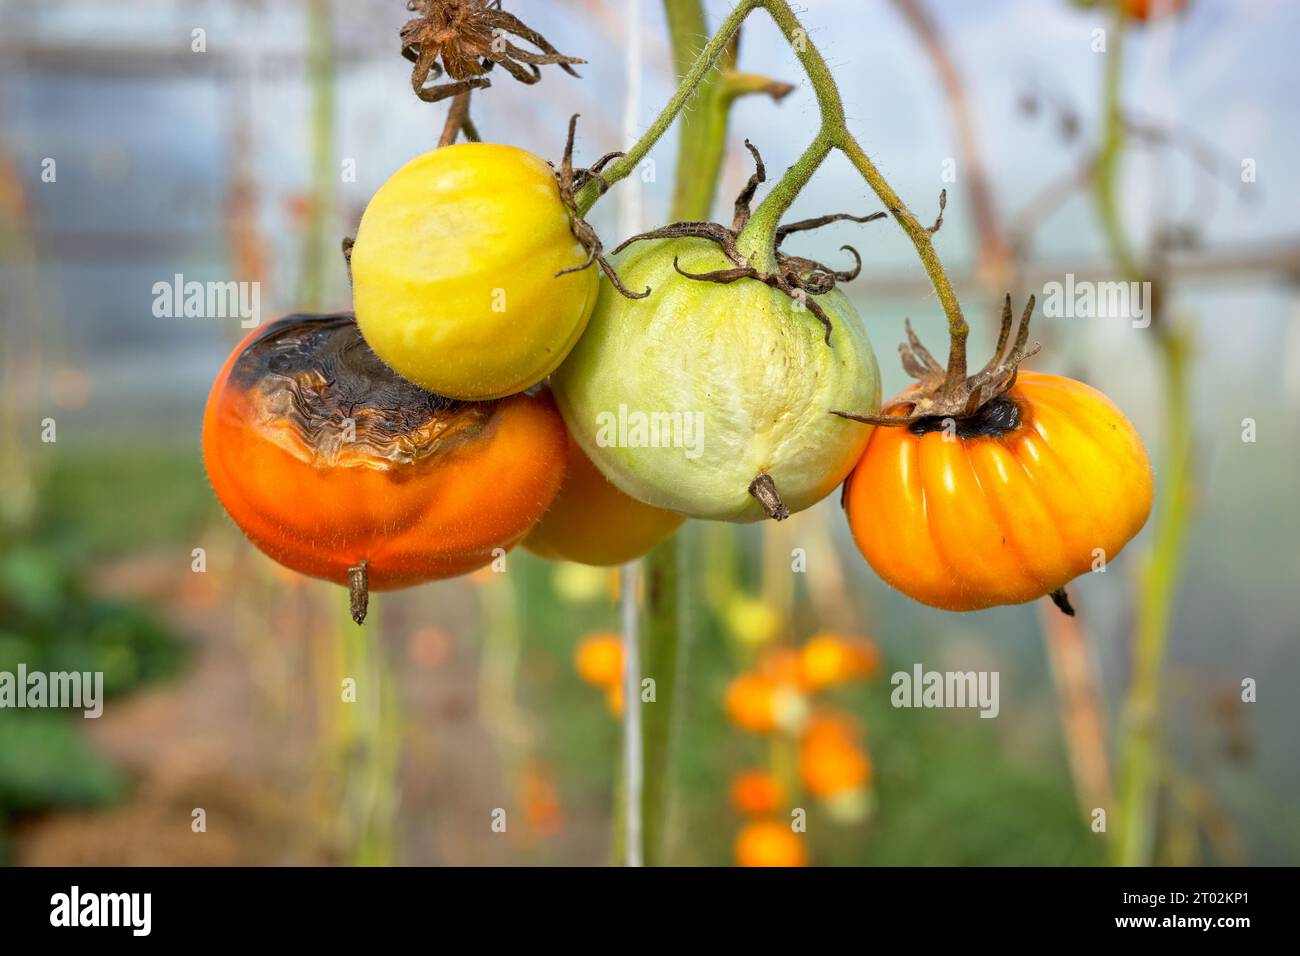 Close up photo of organic tomatoes infected by Phytophthora infestans, selective focus. Stock Photo